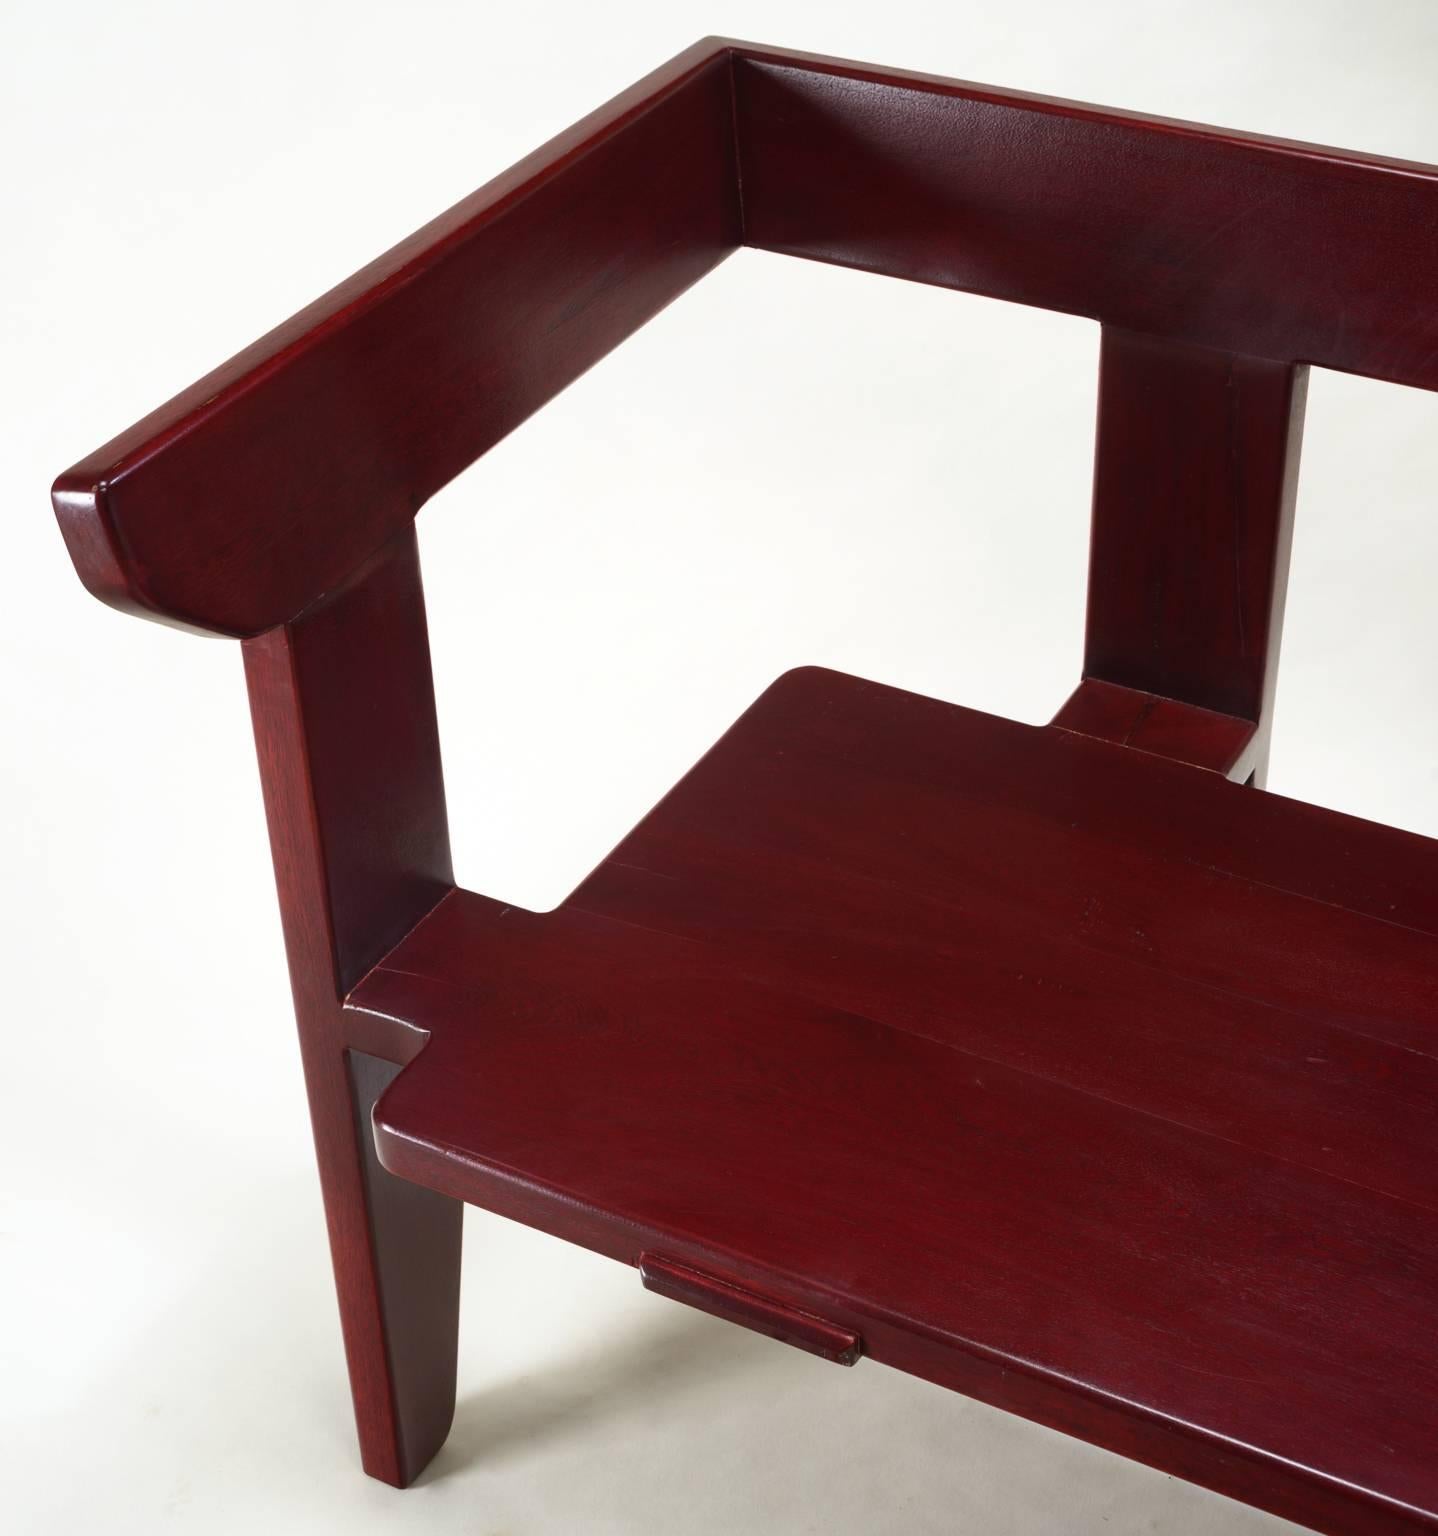 Lacquered Laredo Bench Contemporary Design Traditional Joinery, Hardwood w/ Lacquer Finish For Sale